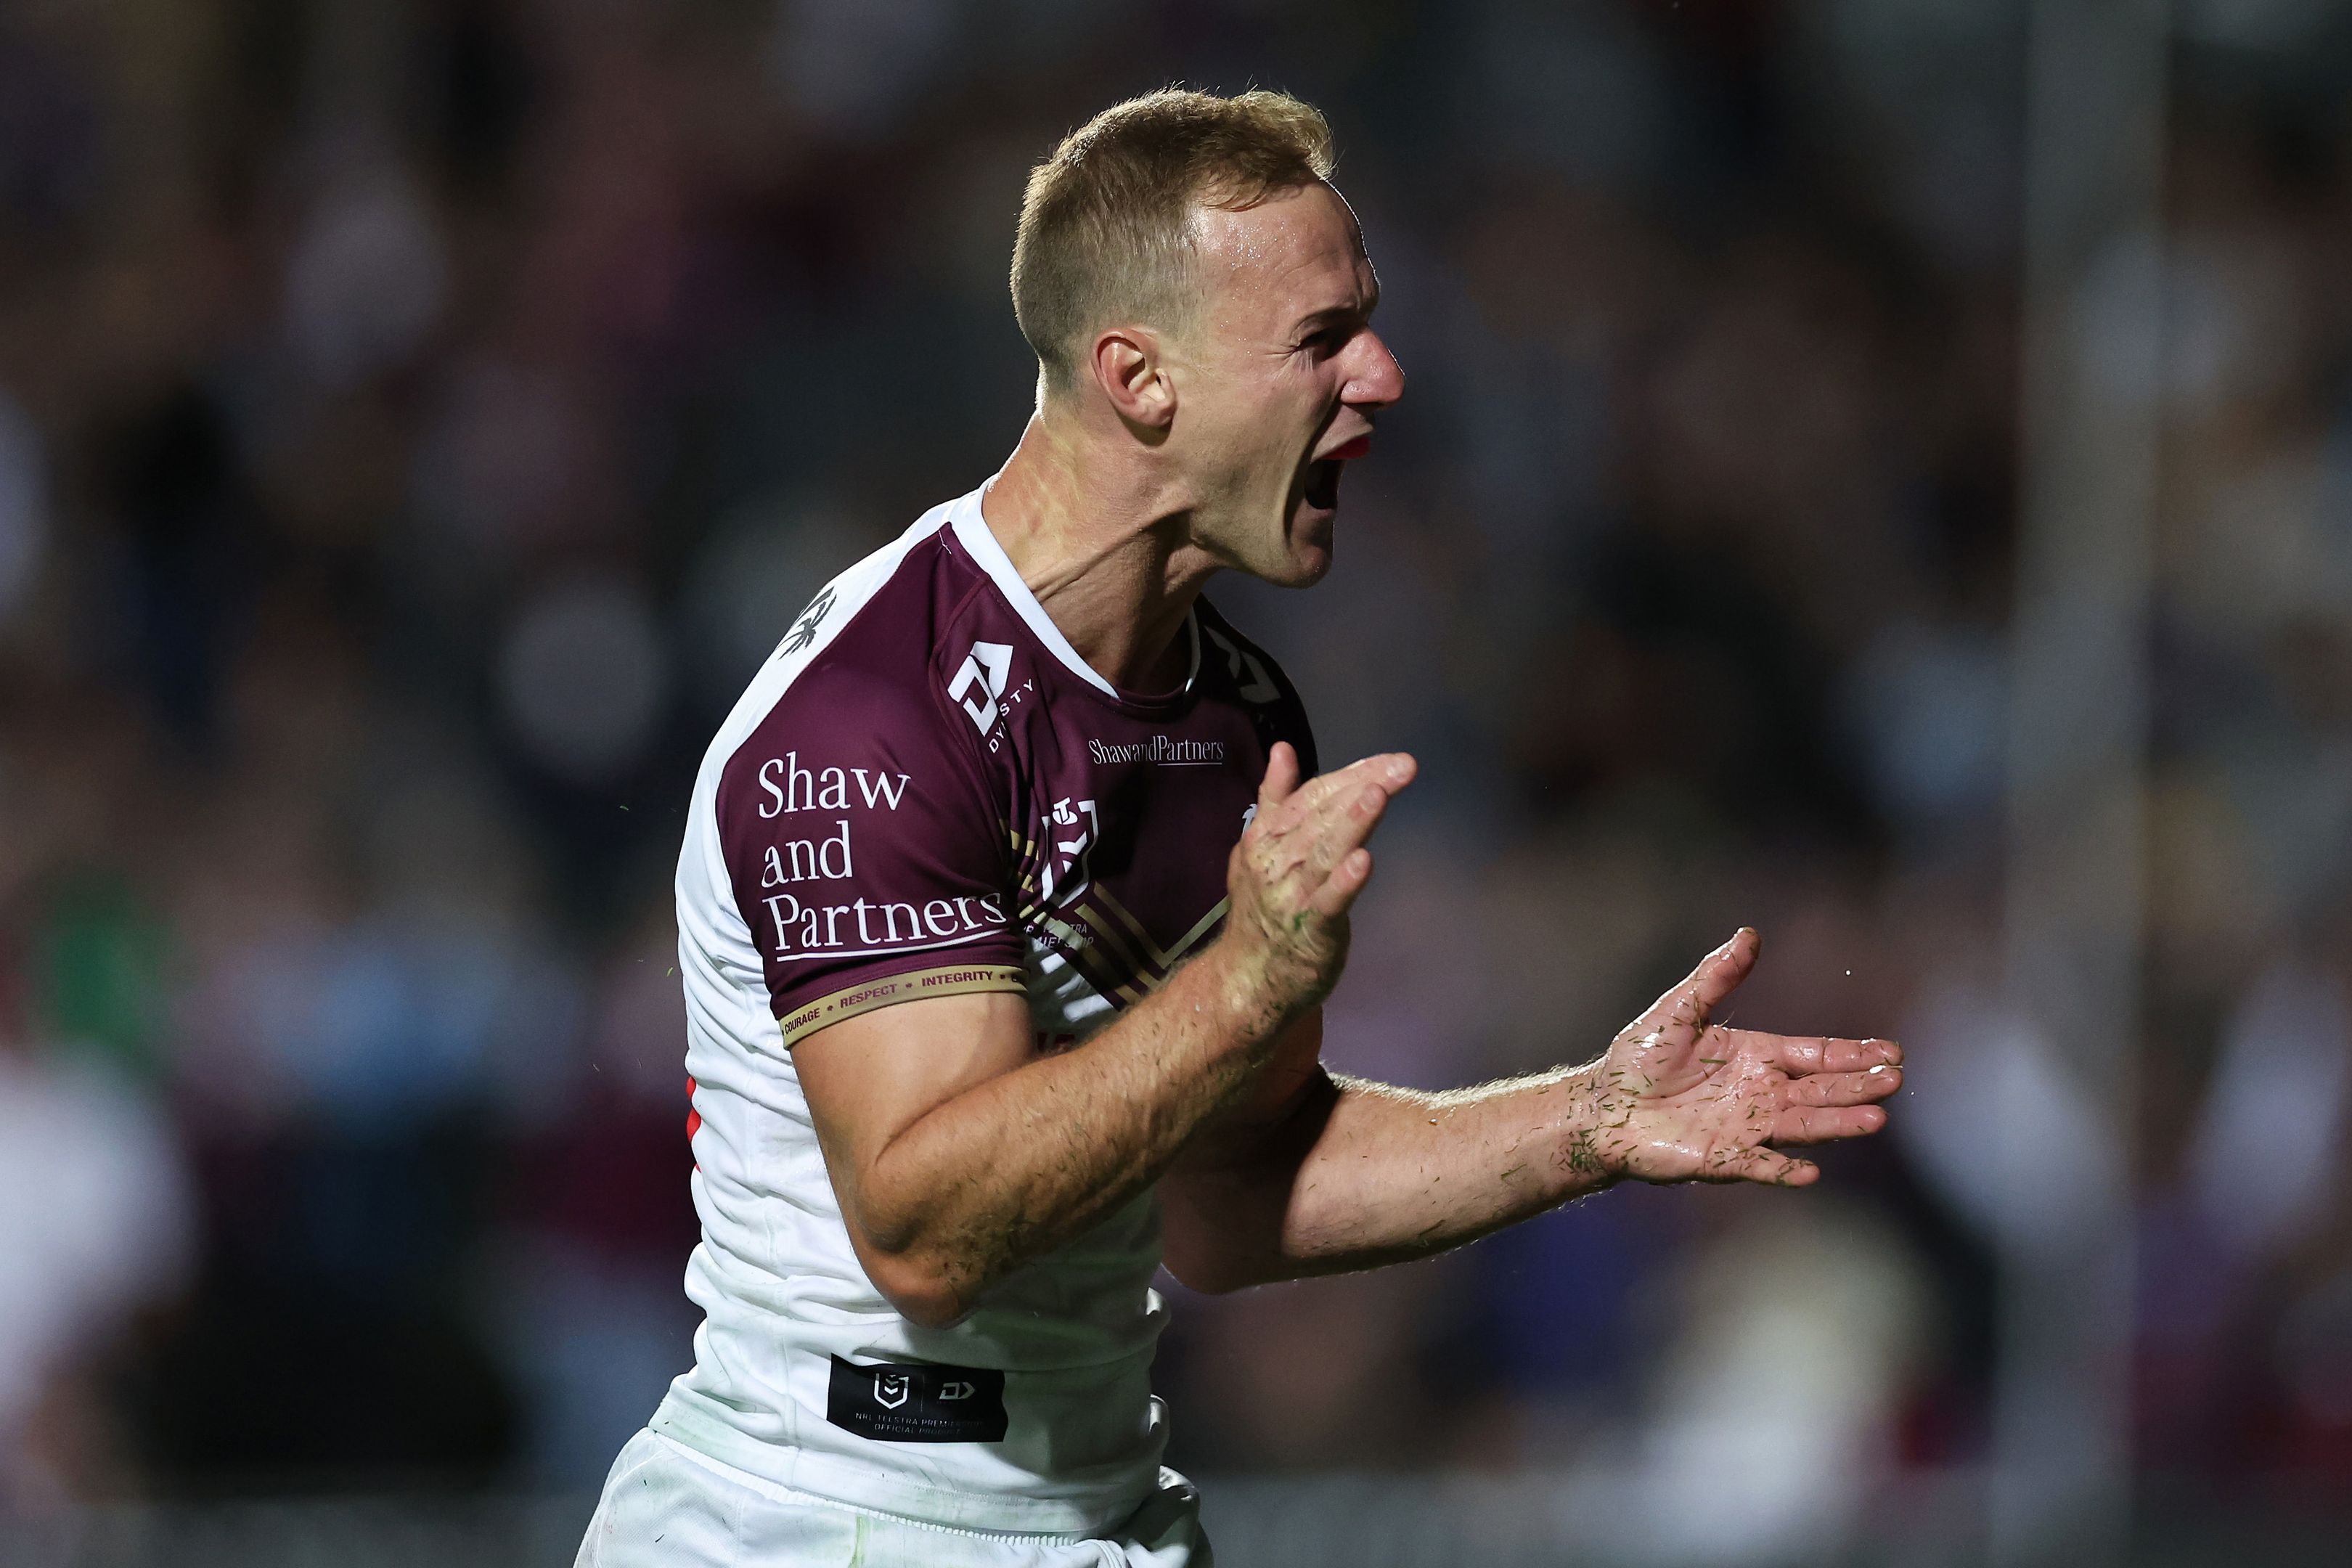 'World class' Daly Cherry-Evans inspires comeback victory as Eels lament 'discipline' concerns